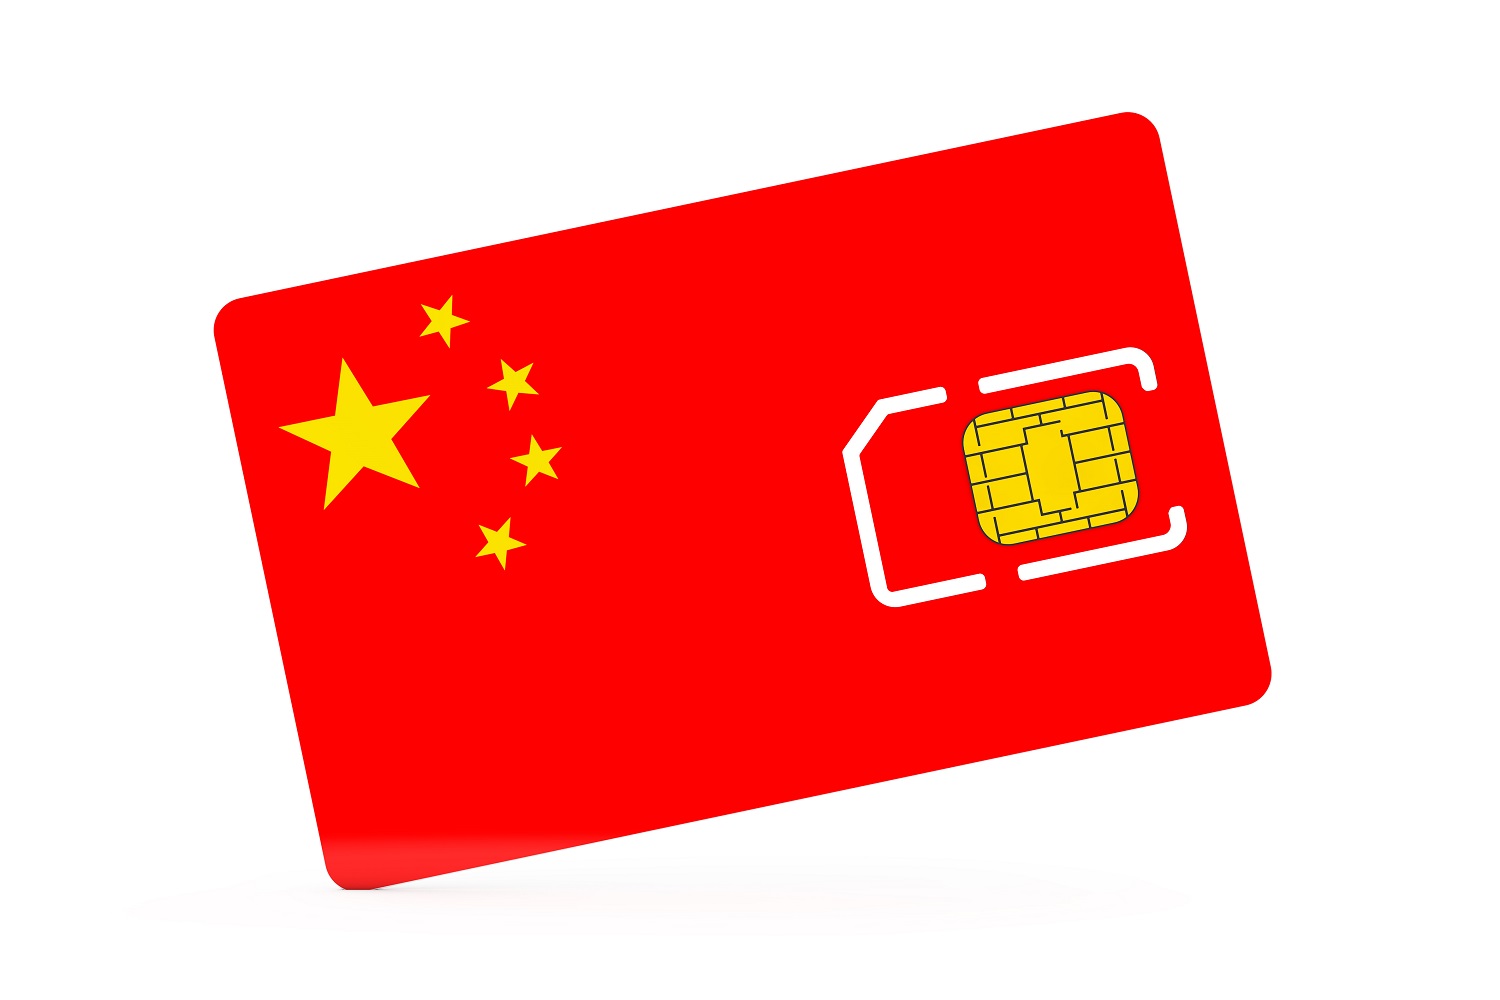 A mobile phone SIM card chip decorated in the colors of the Chinese flag.